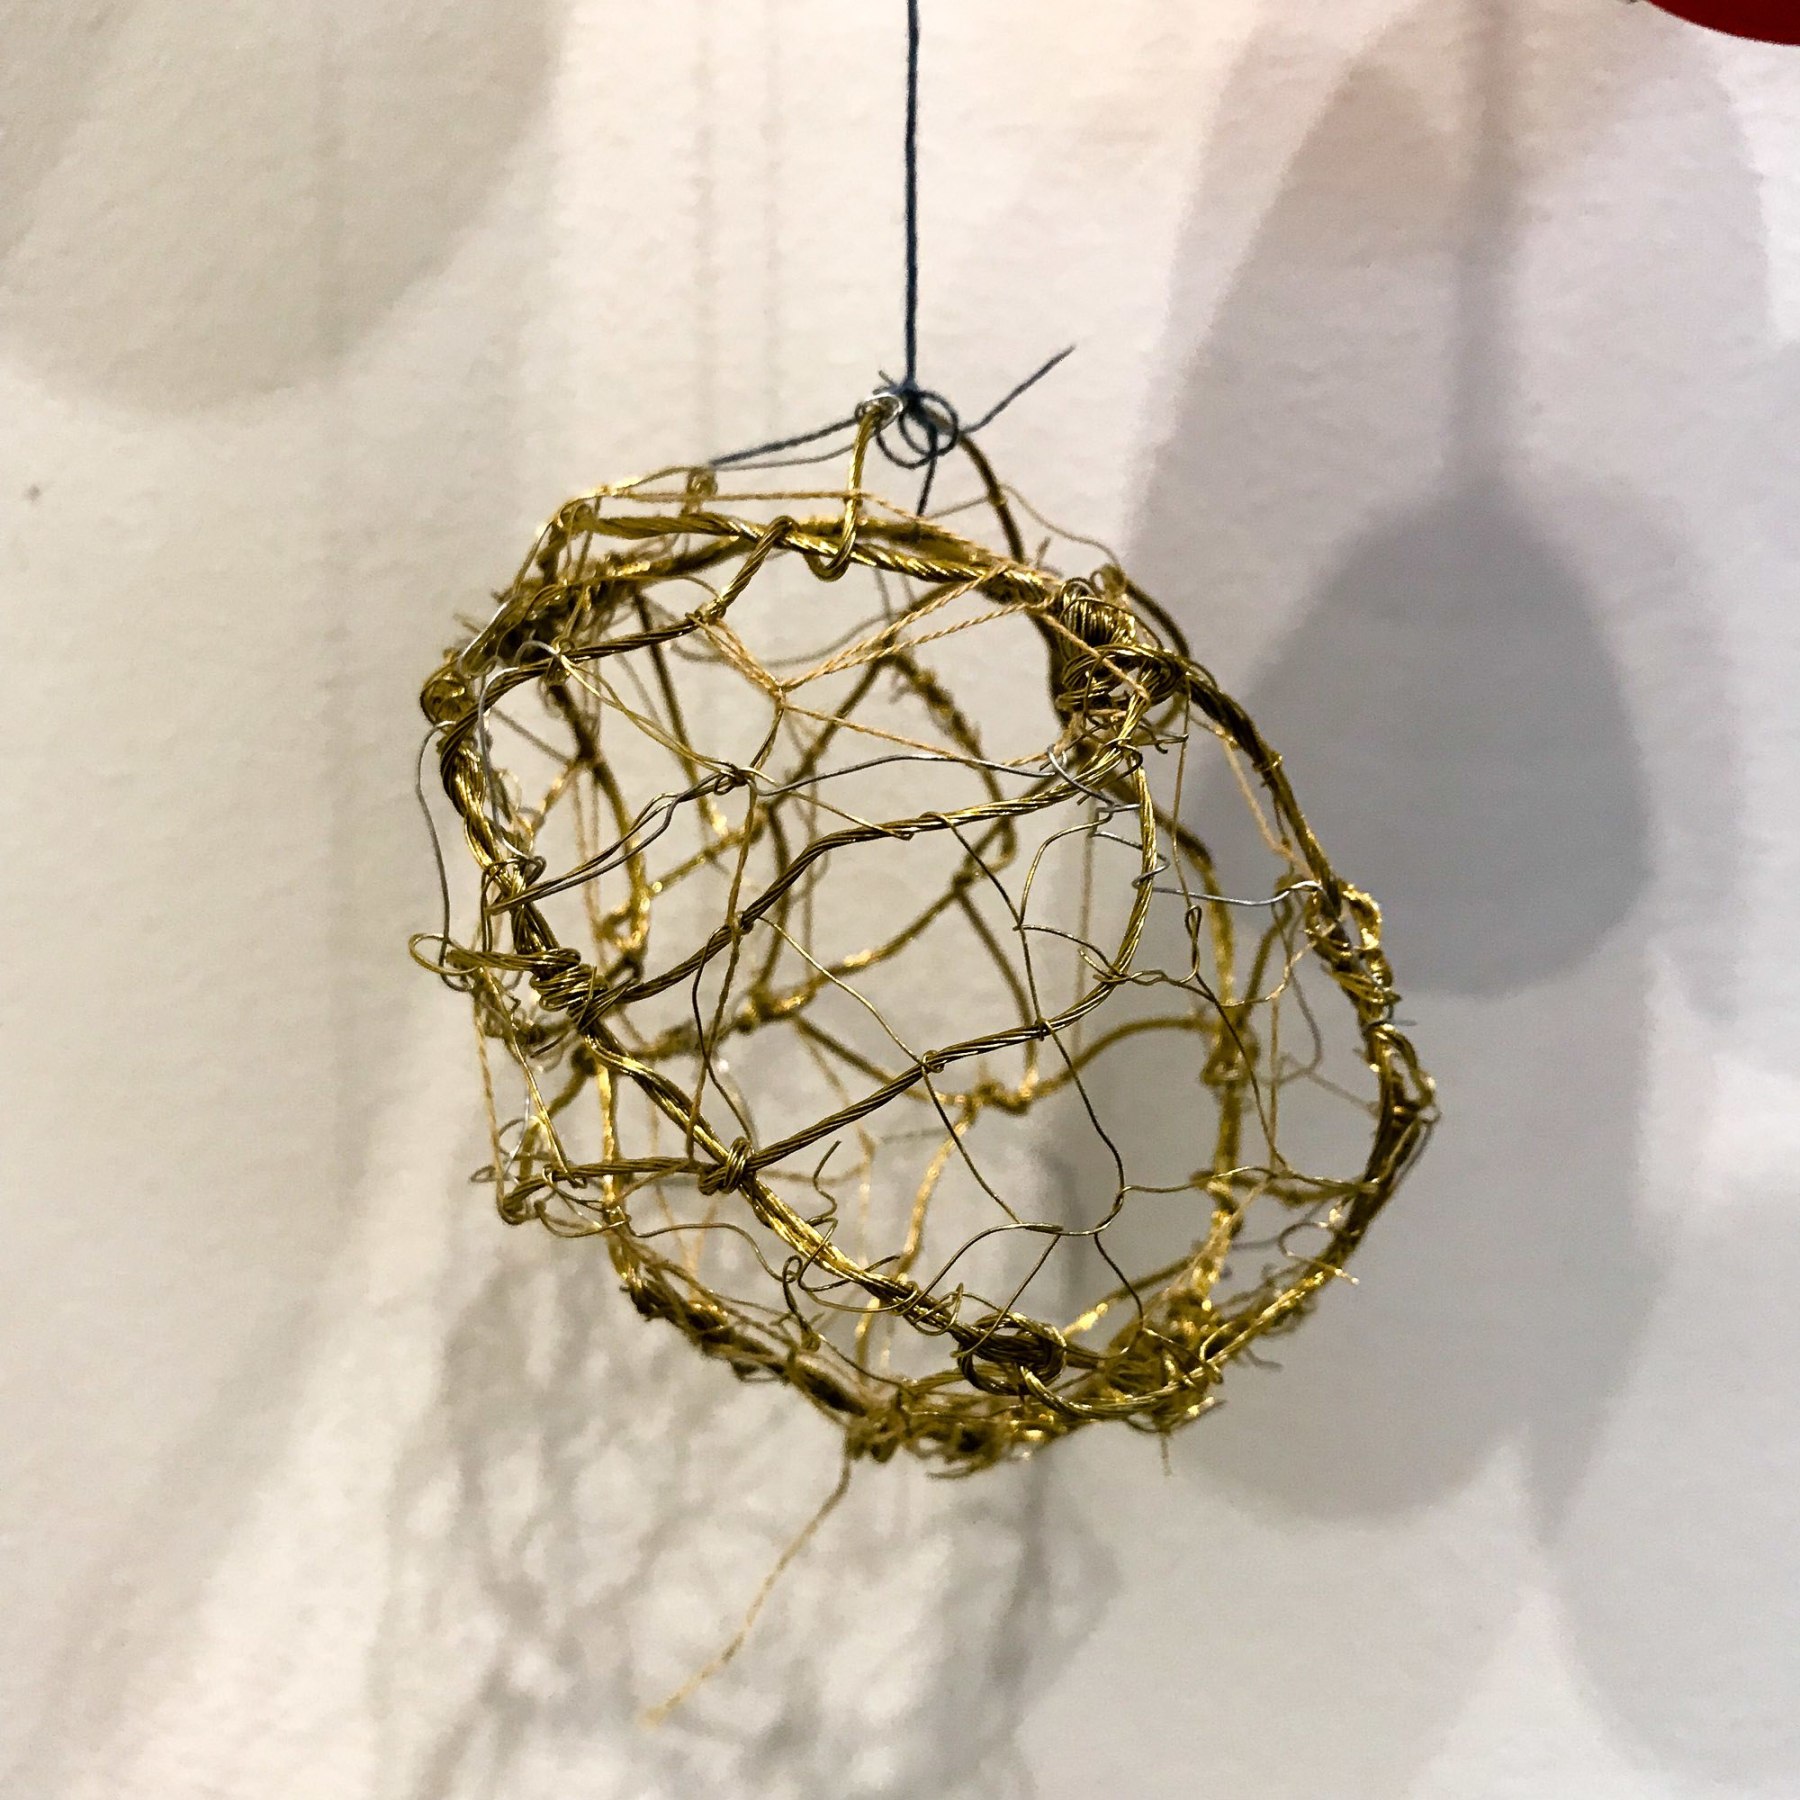 Amanda Humphries, Beloved Poet, porcelain with thread and wire, (Poem inside by poet Andrea Sheldon instagram @andreasheldon_) ​2018